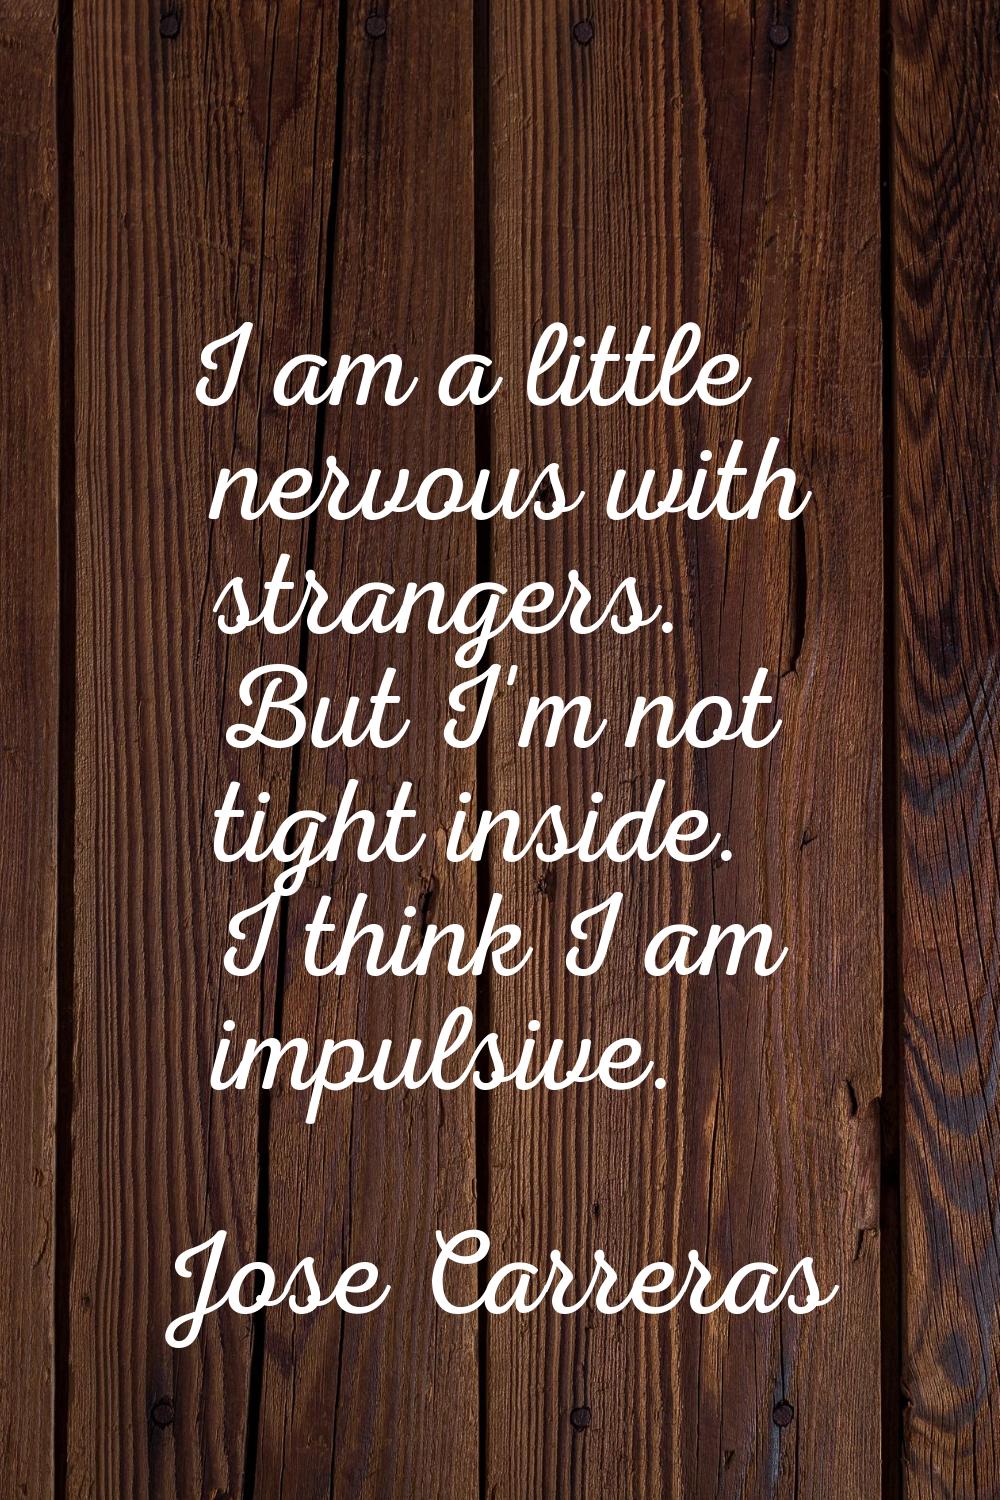 I am a little nervous with strangers. But I'm not tight inside. I think I am impulsive.